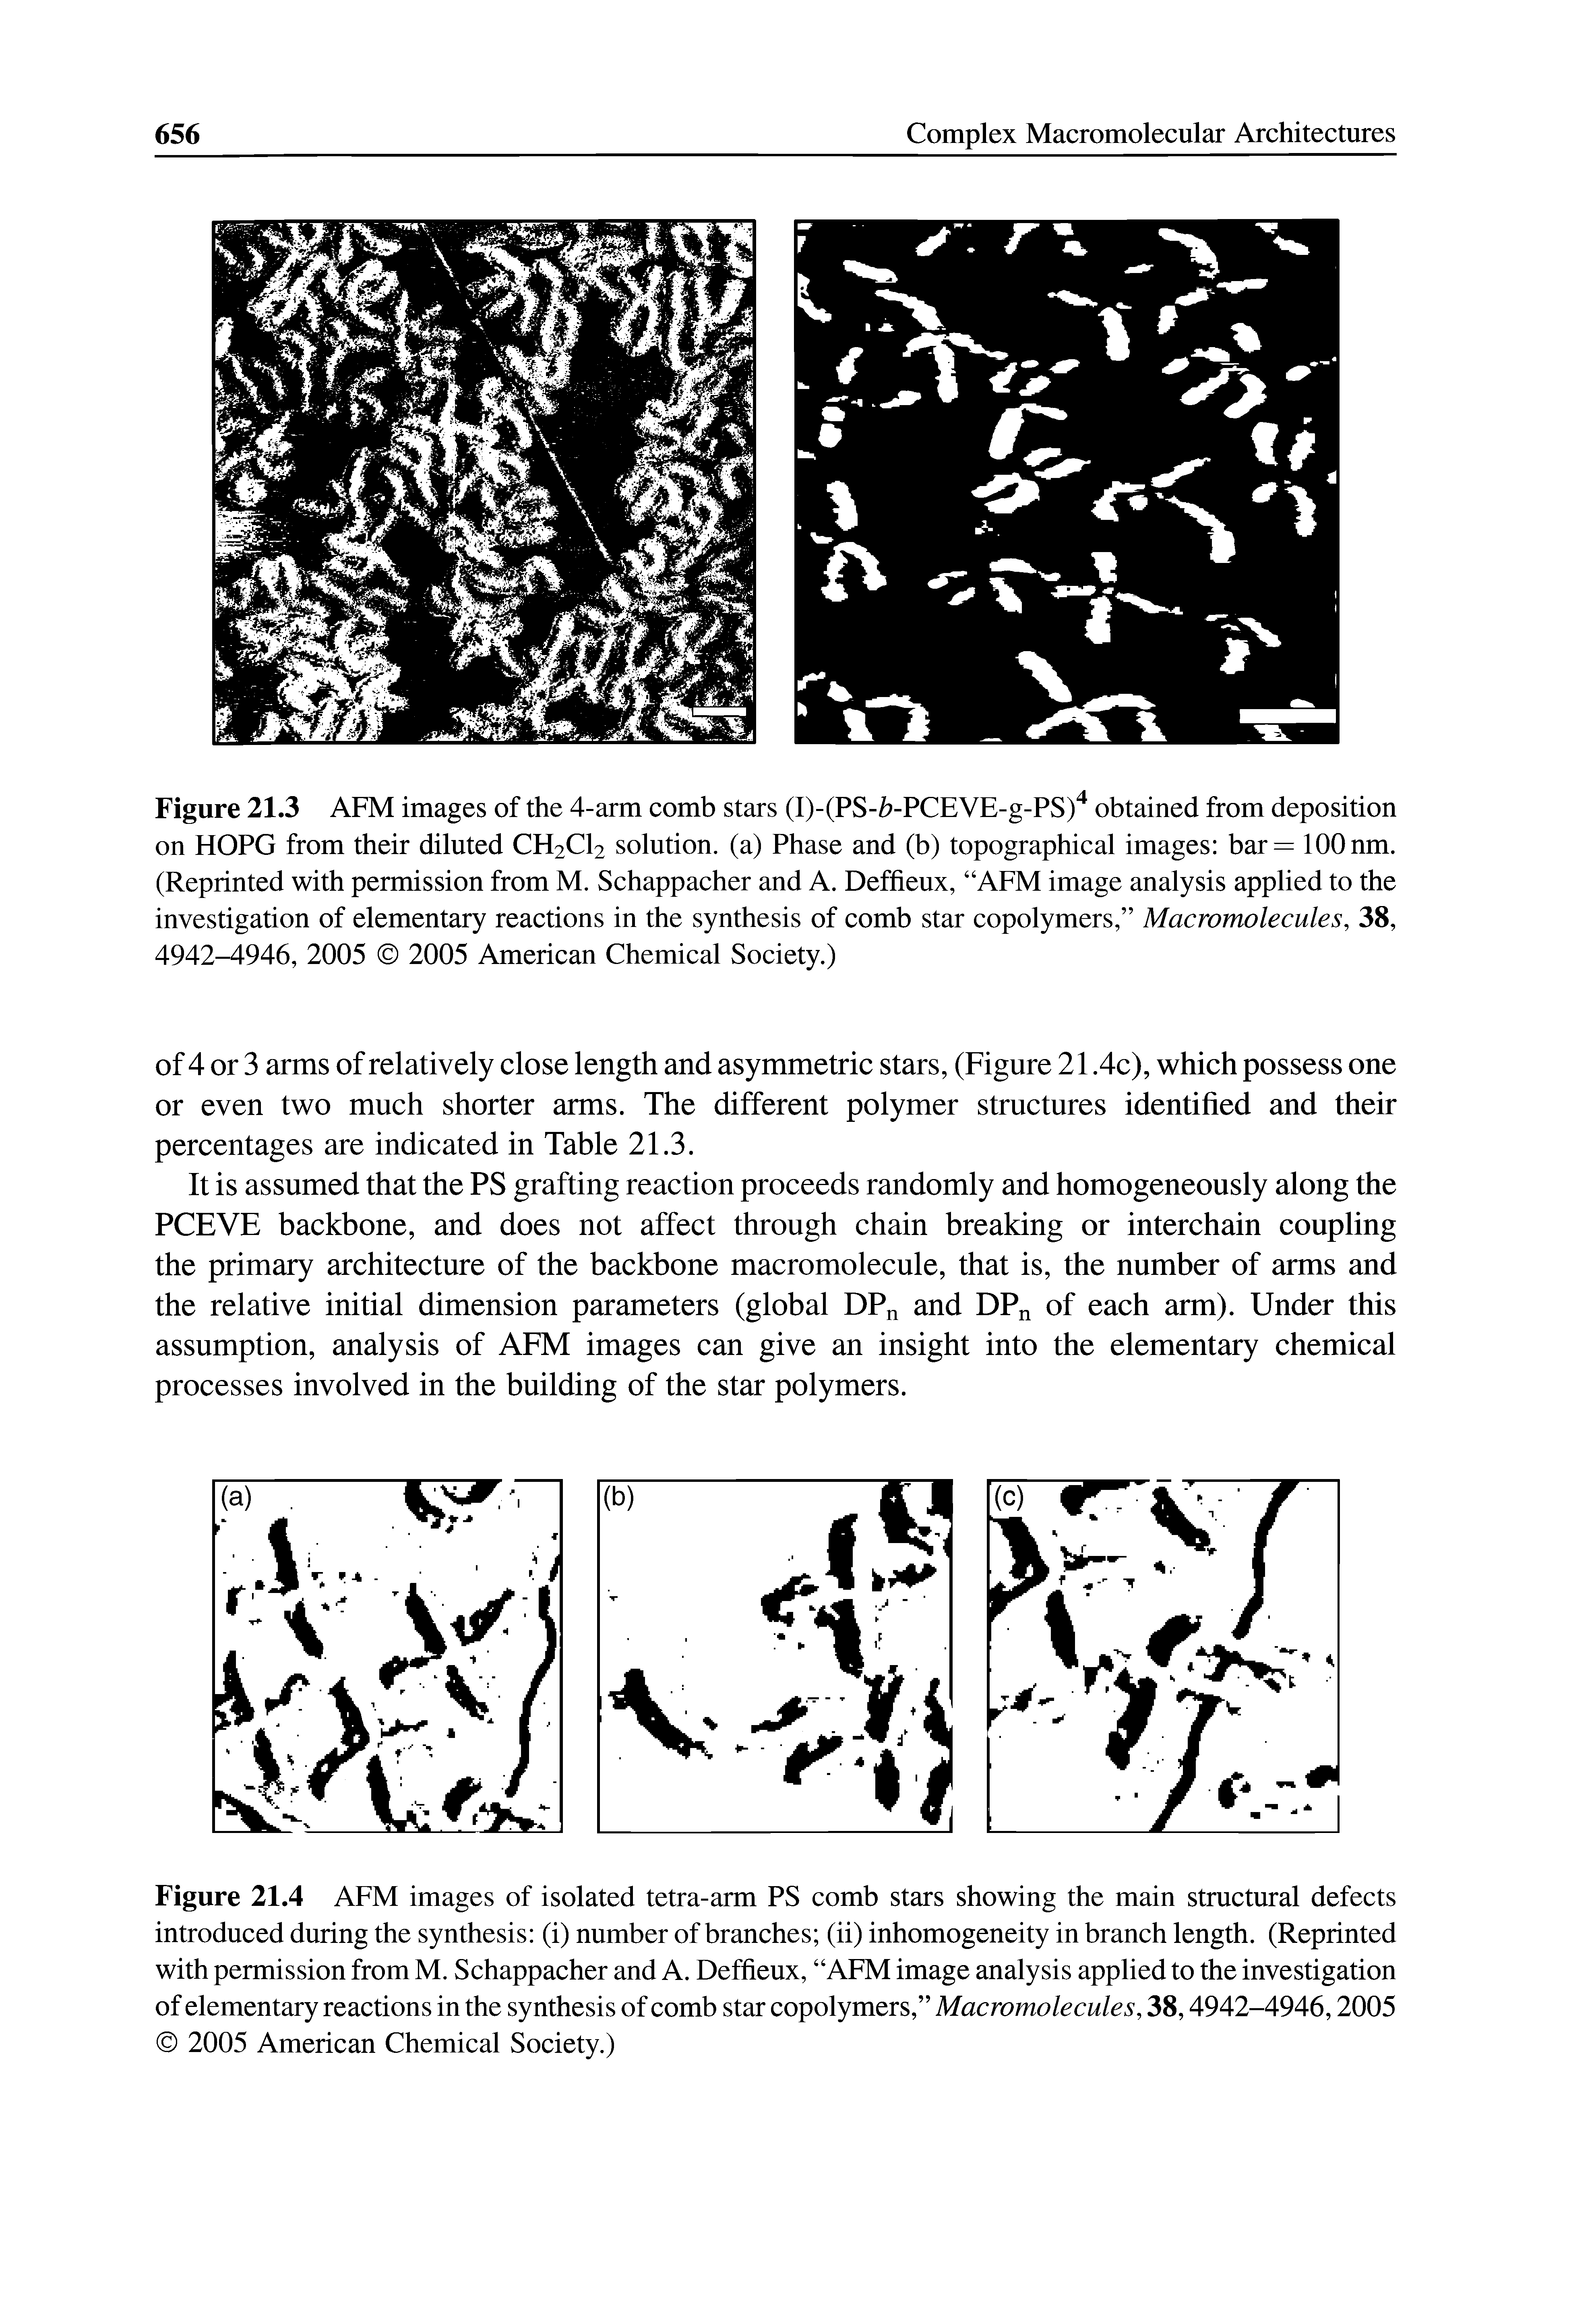 Figure 21.4 AFM images of isolated tetra-arm PS comb stars showing the main structural defects introduced during the synthesis (i) number of branches (ii) inhomogeneity in branch length. (Reprinted with permission from M. Schappacher and A. Deffieux, AFM image analysis applied to the investigation of elementary reactions in the synthesis of comb star copolymers, Macromolecules, 38,4942-4946,2005 2005 American Chemical Society.)...